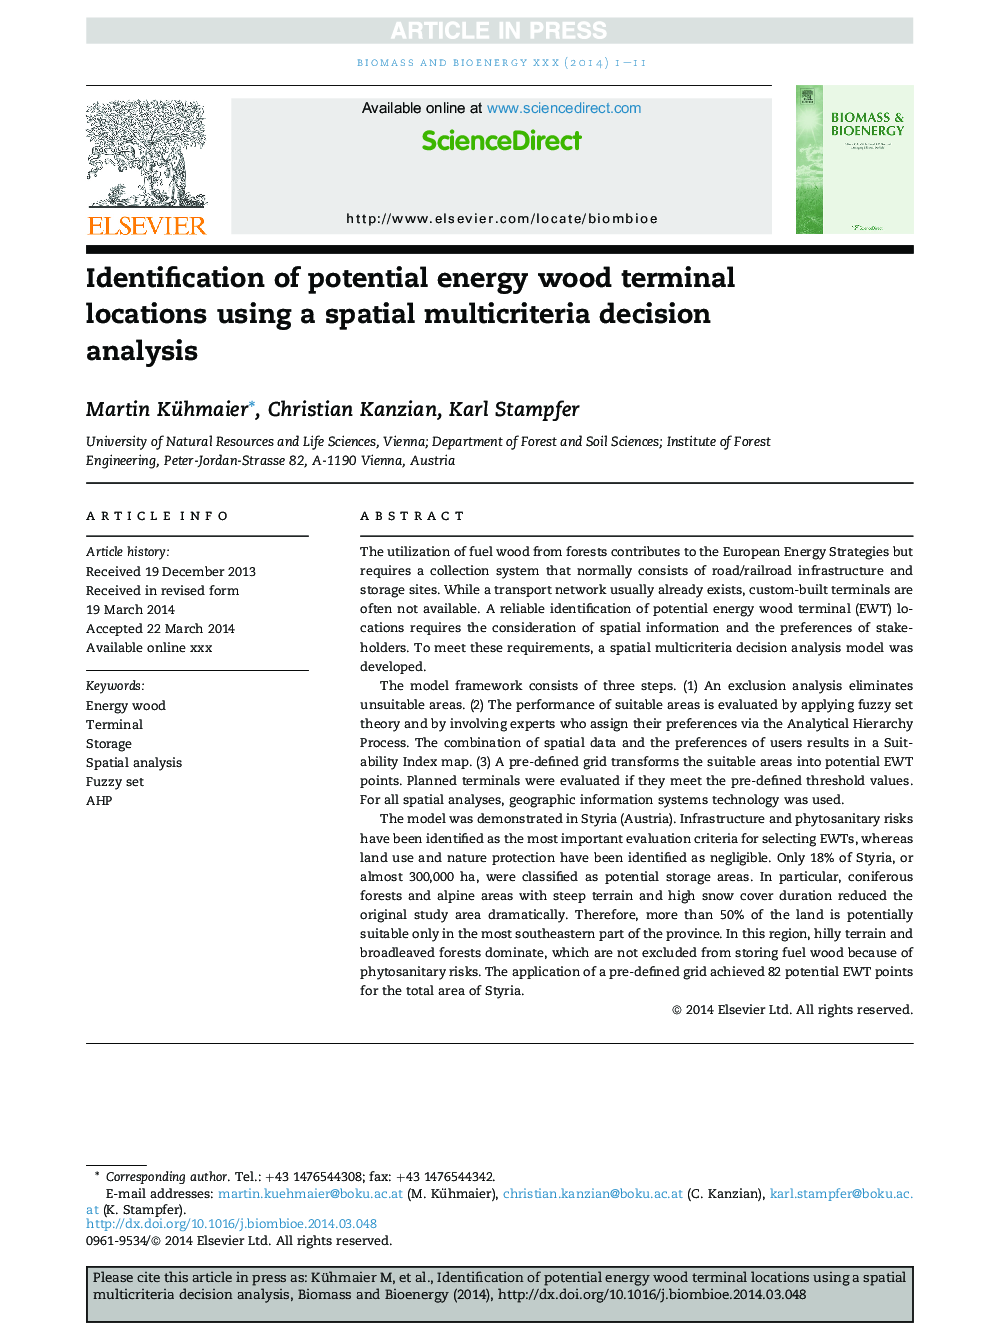 Identification of potential energy wood terminal locations using a spatial multicriteria decision analysis